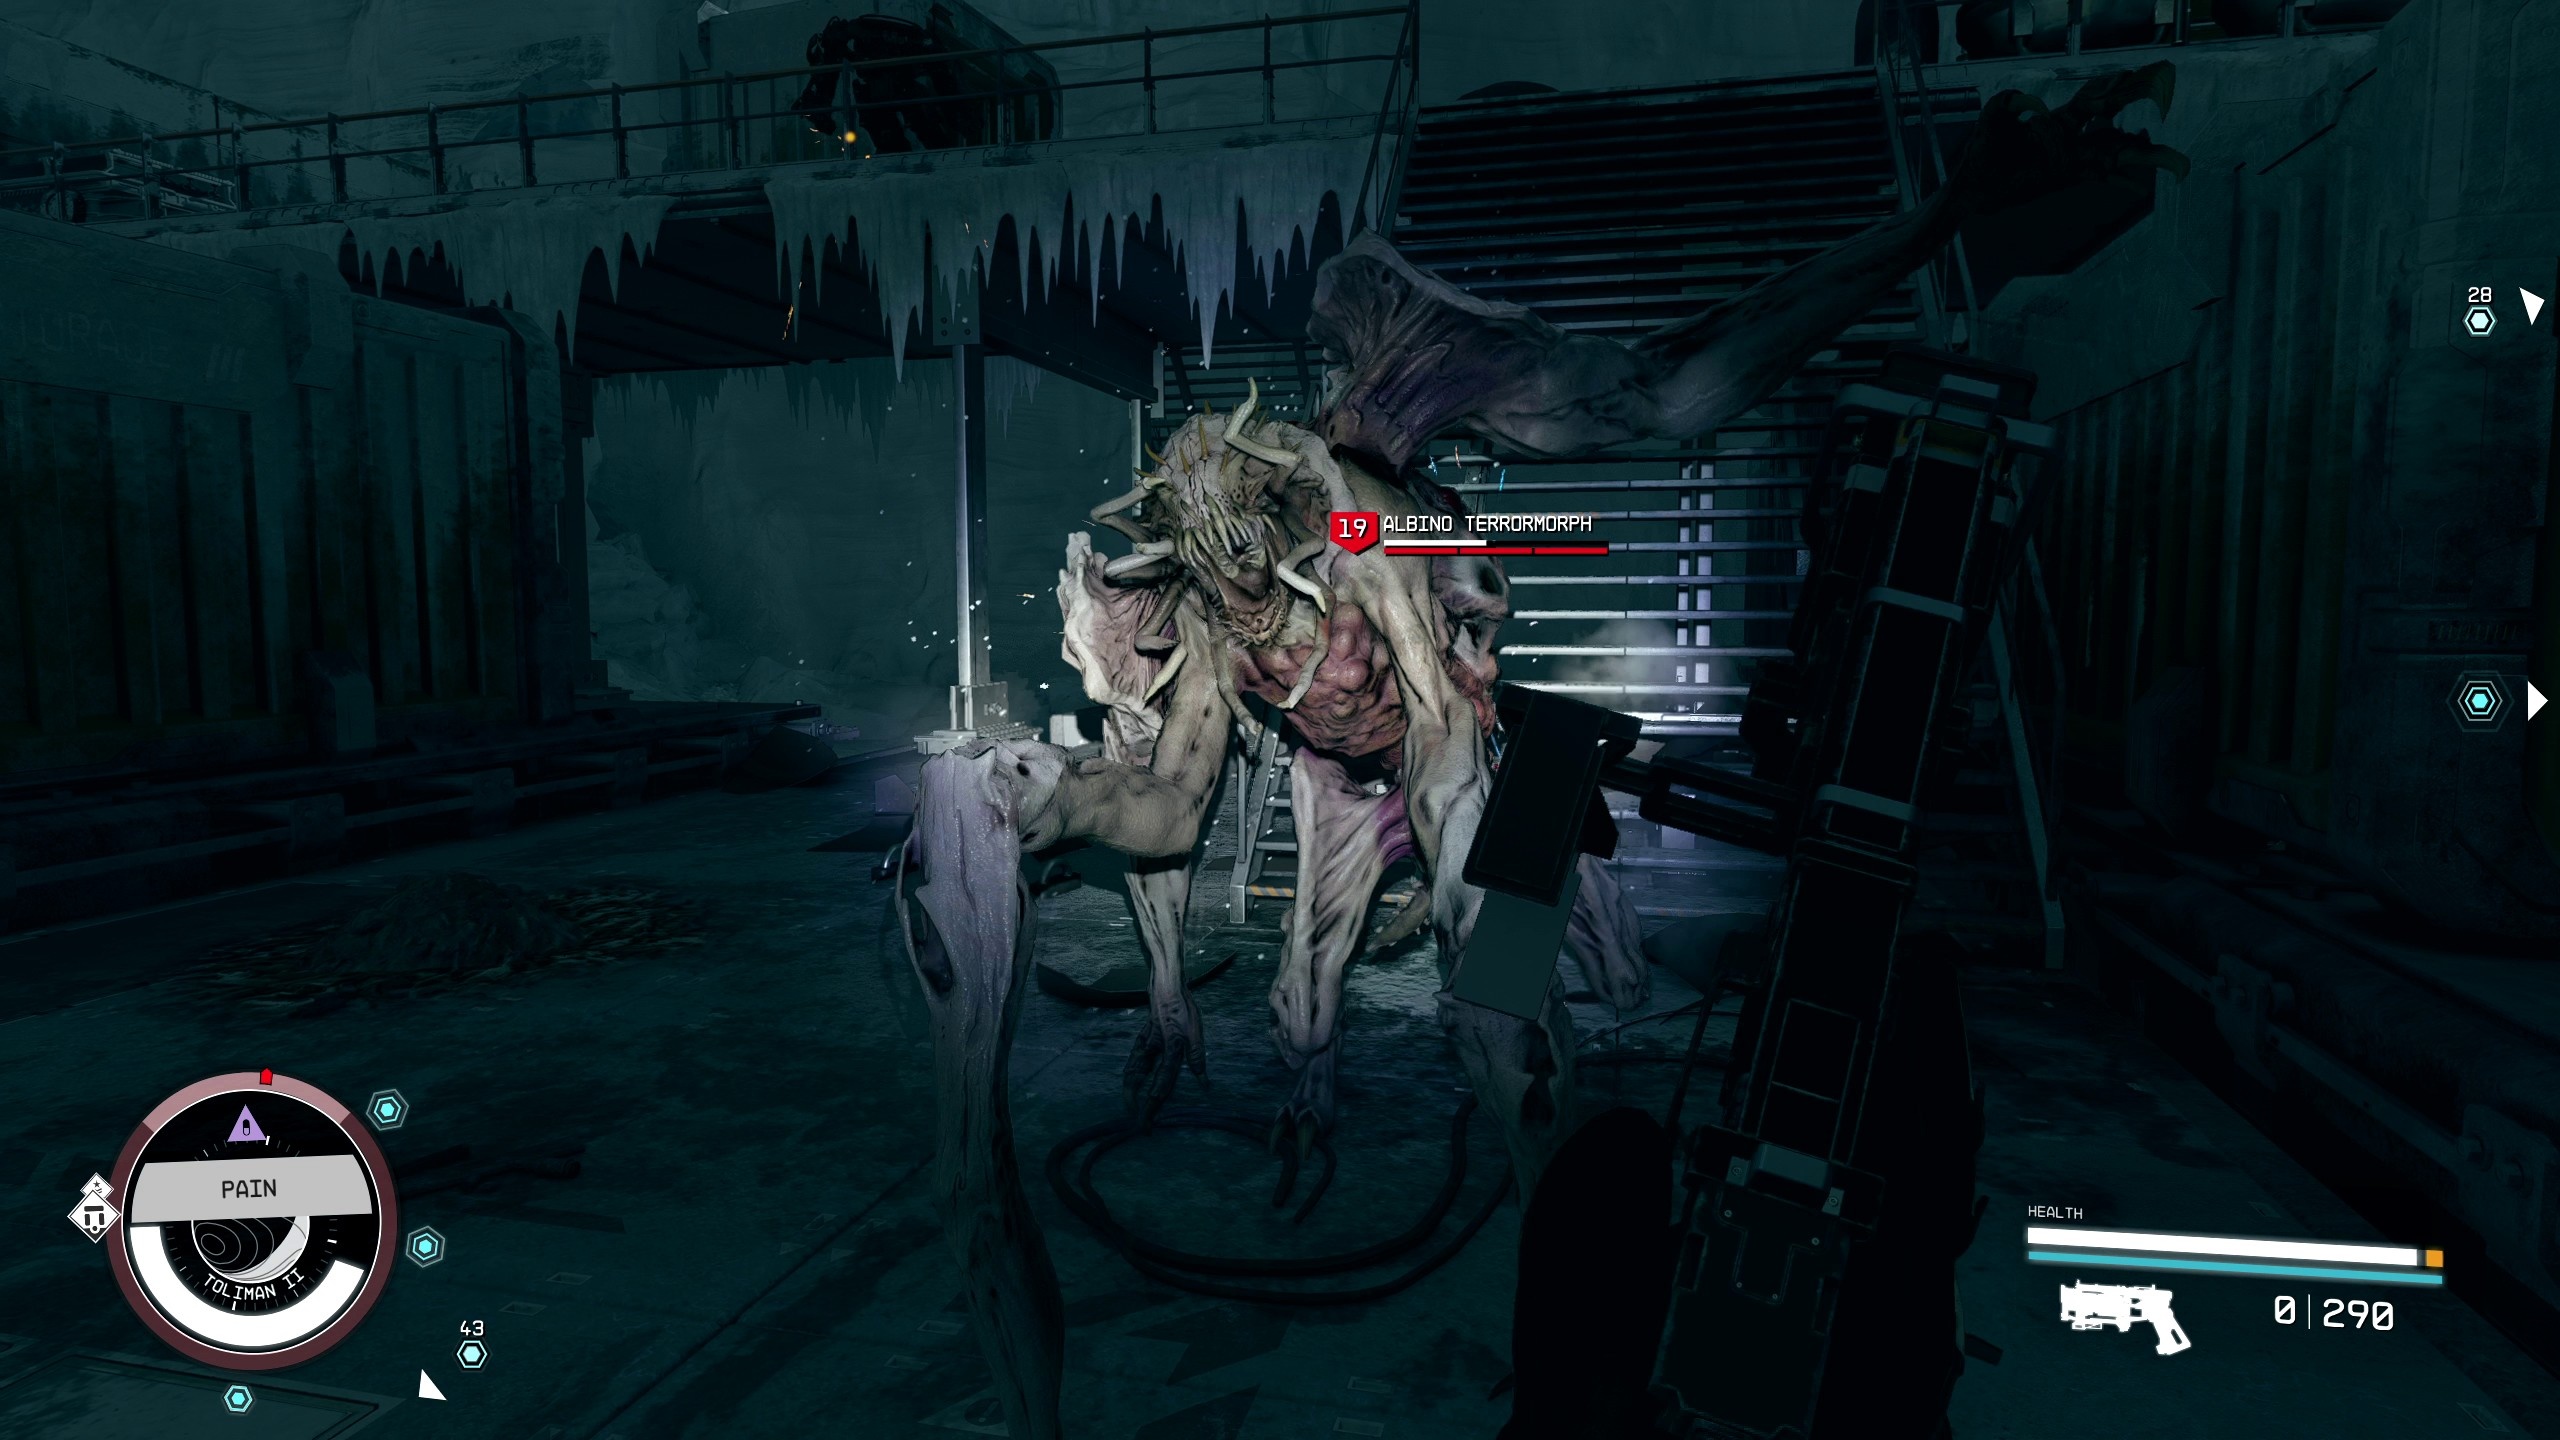 (Instead of death claws, there are Terrormorphs in Starfield. Bethesda stays true to itself.)